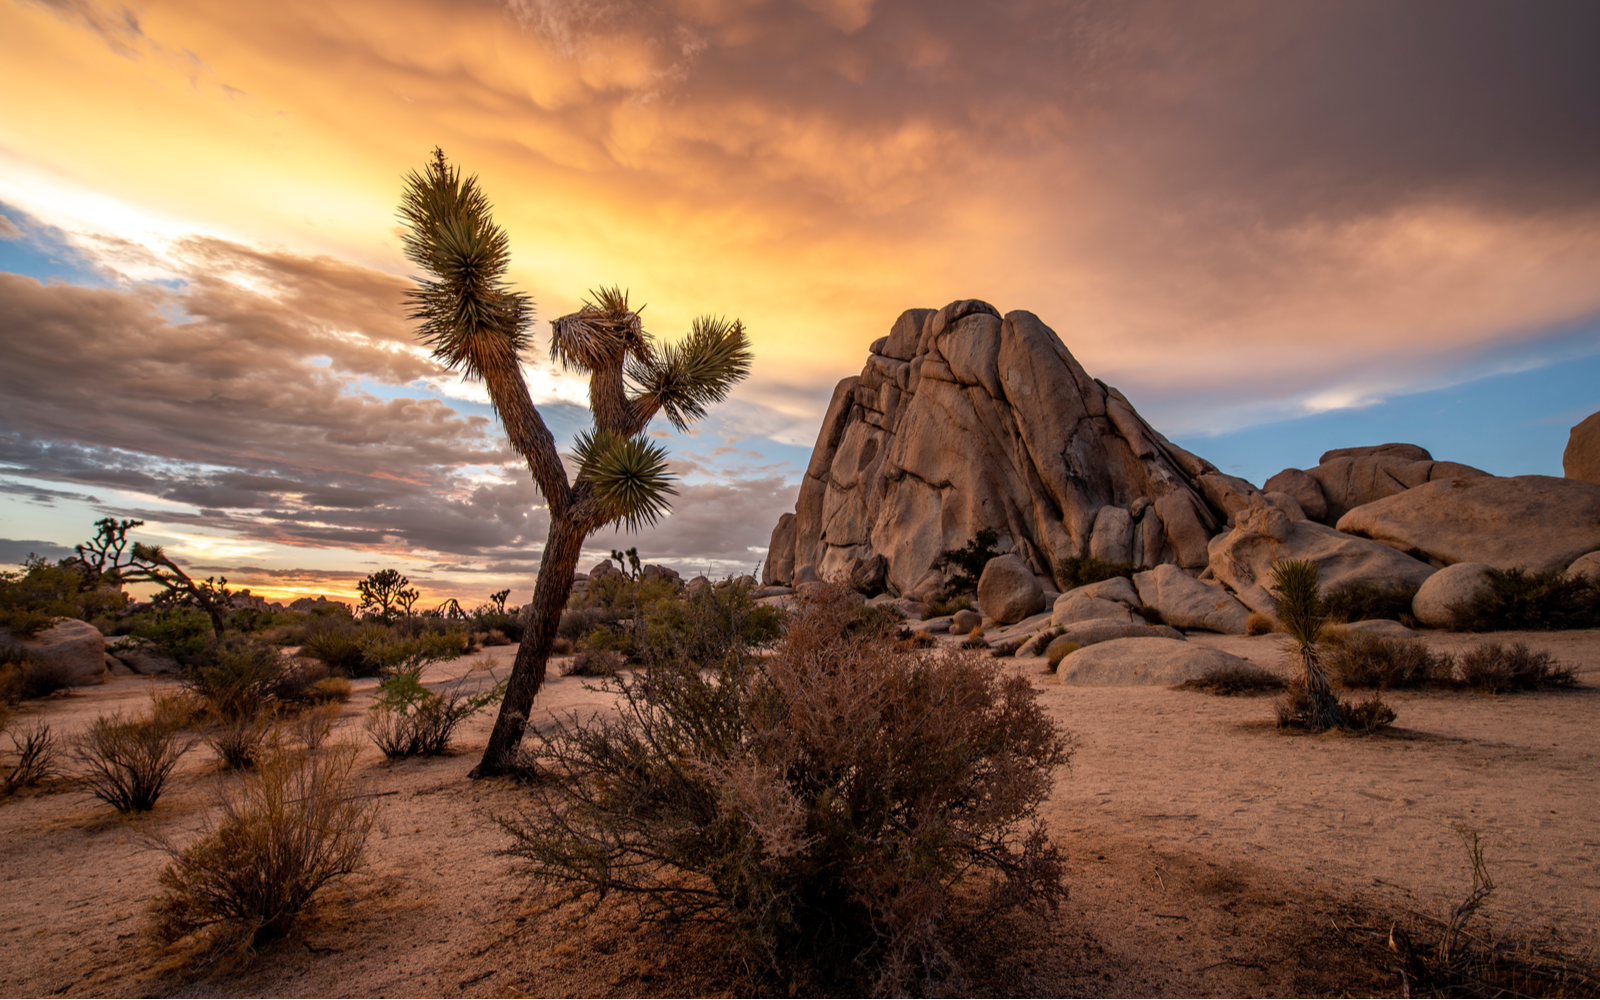 Clouds hide a sunset with a prickly tree and brown rocks during the best time to visit Joshua Tree